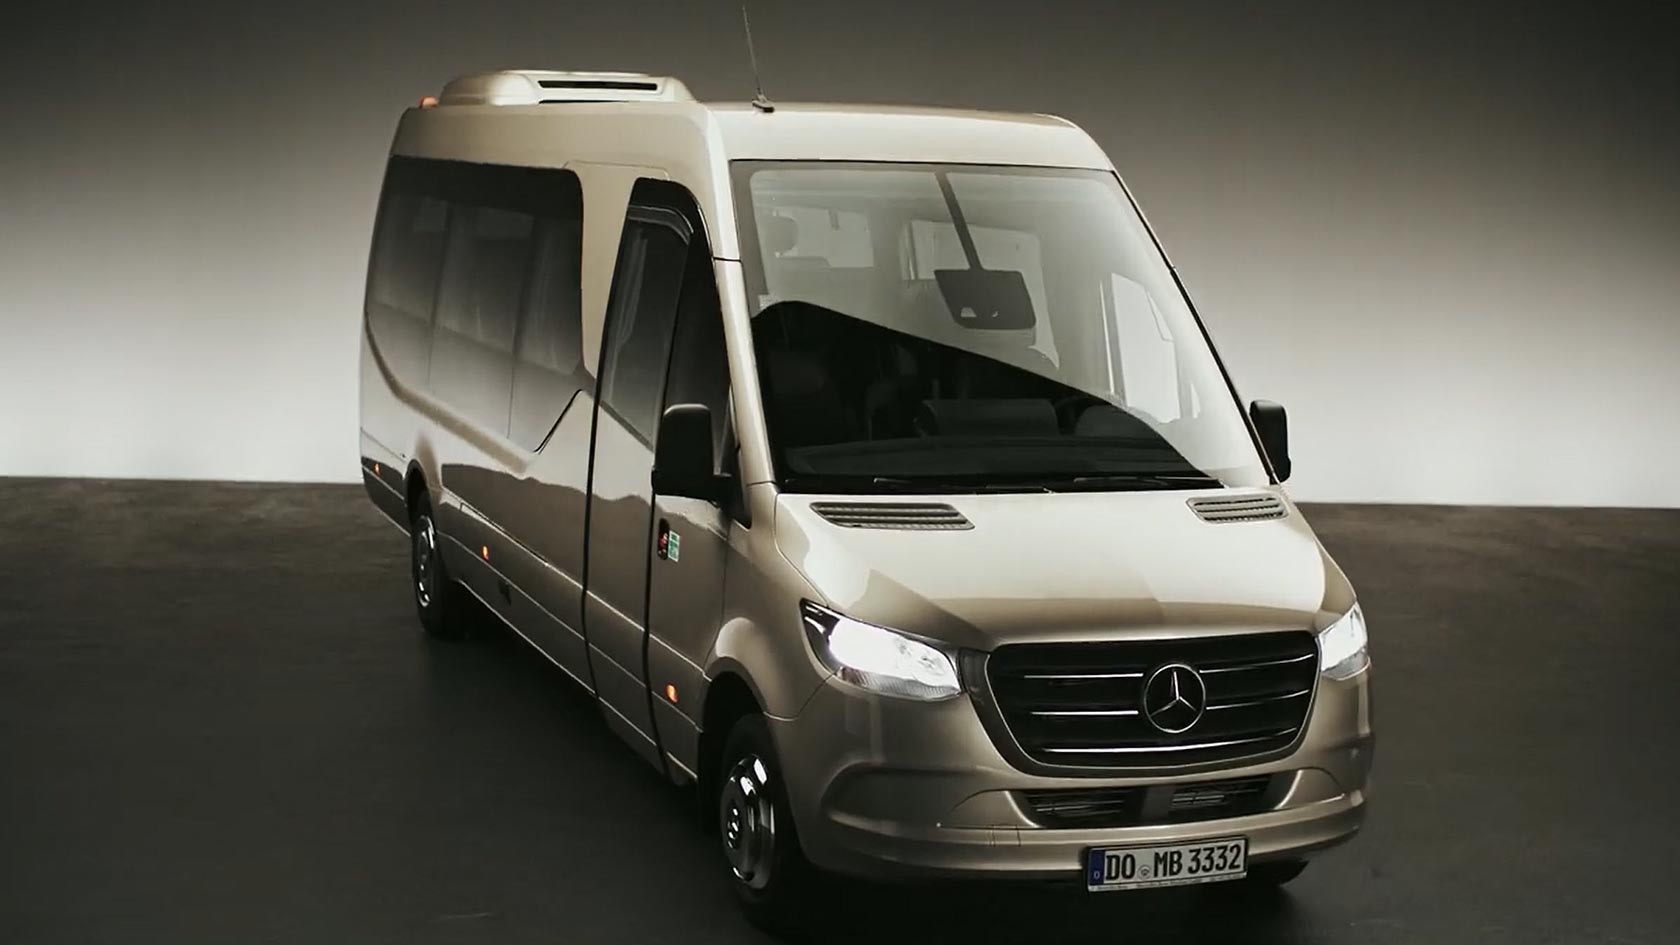 Tips for Hiring the Perfect Minibus for Your London Event